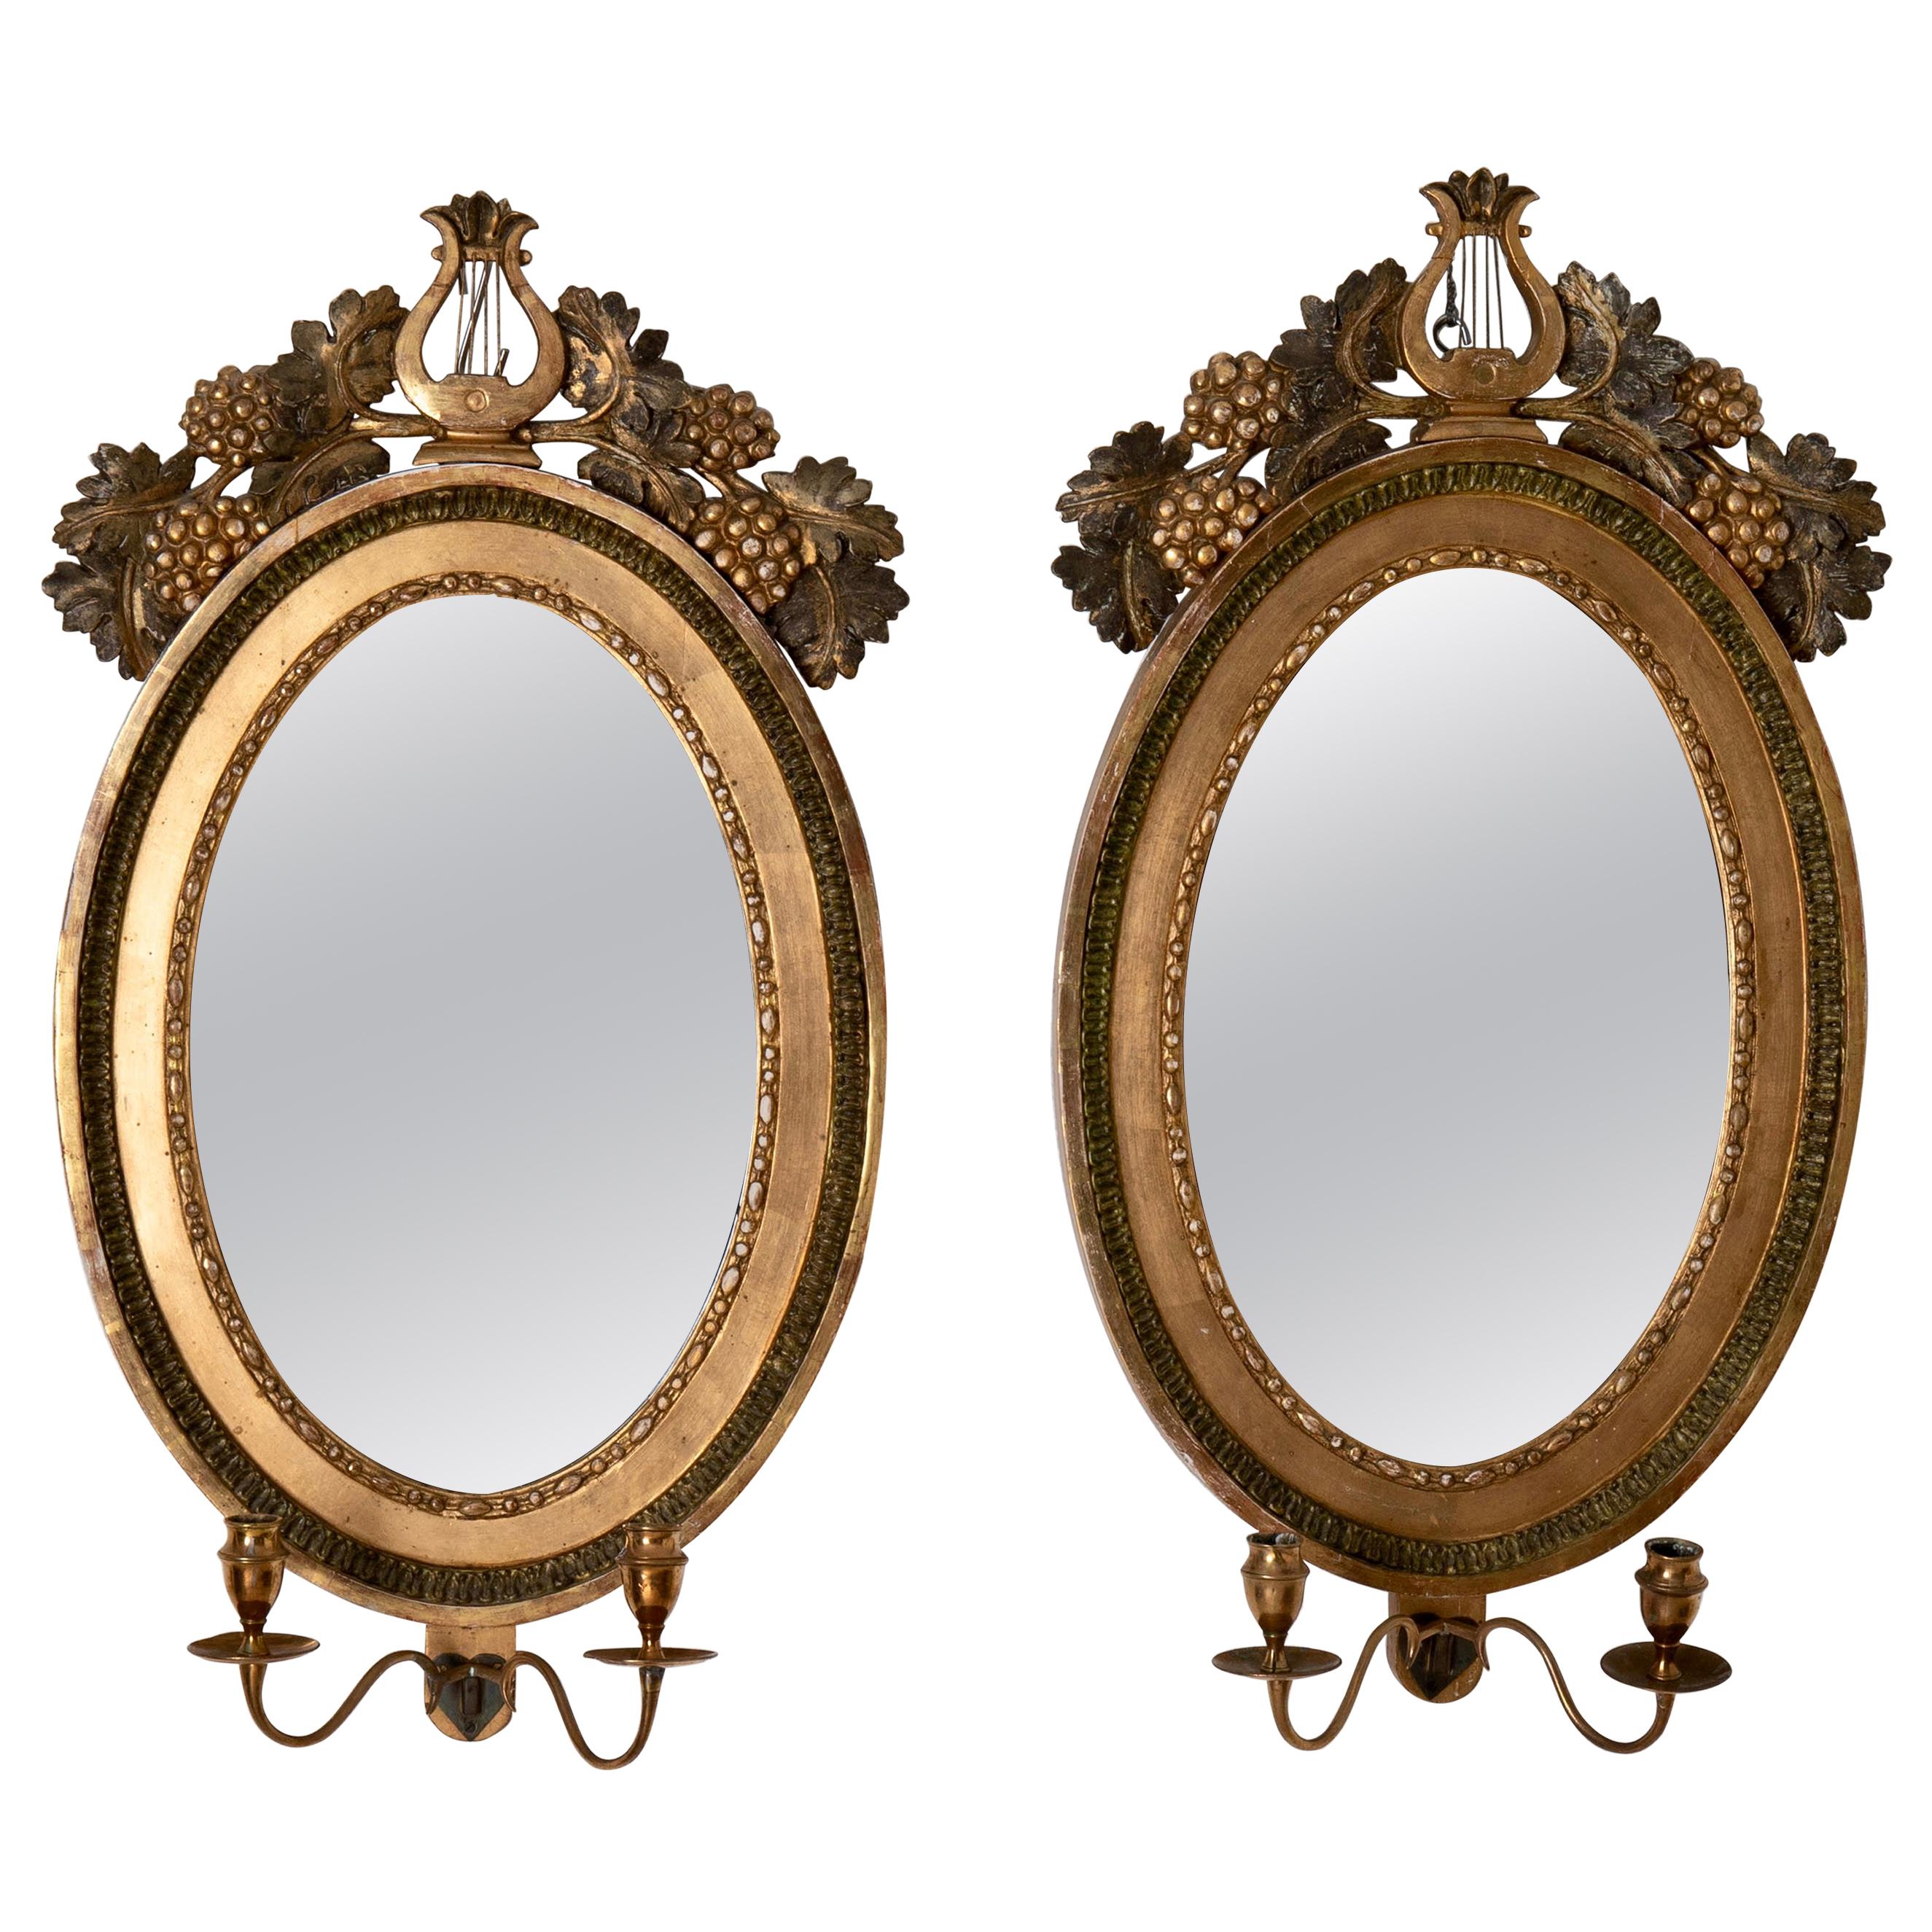 Mirrored Wall Sconces Swedish Gustavian 18th Century Signed Gilded Sweden, Pair